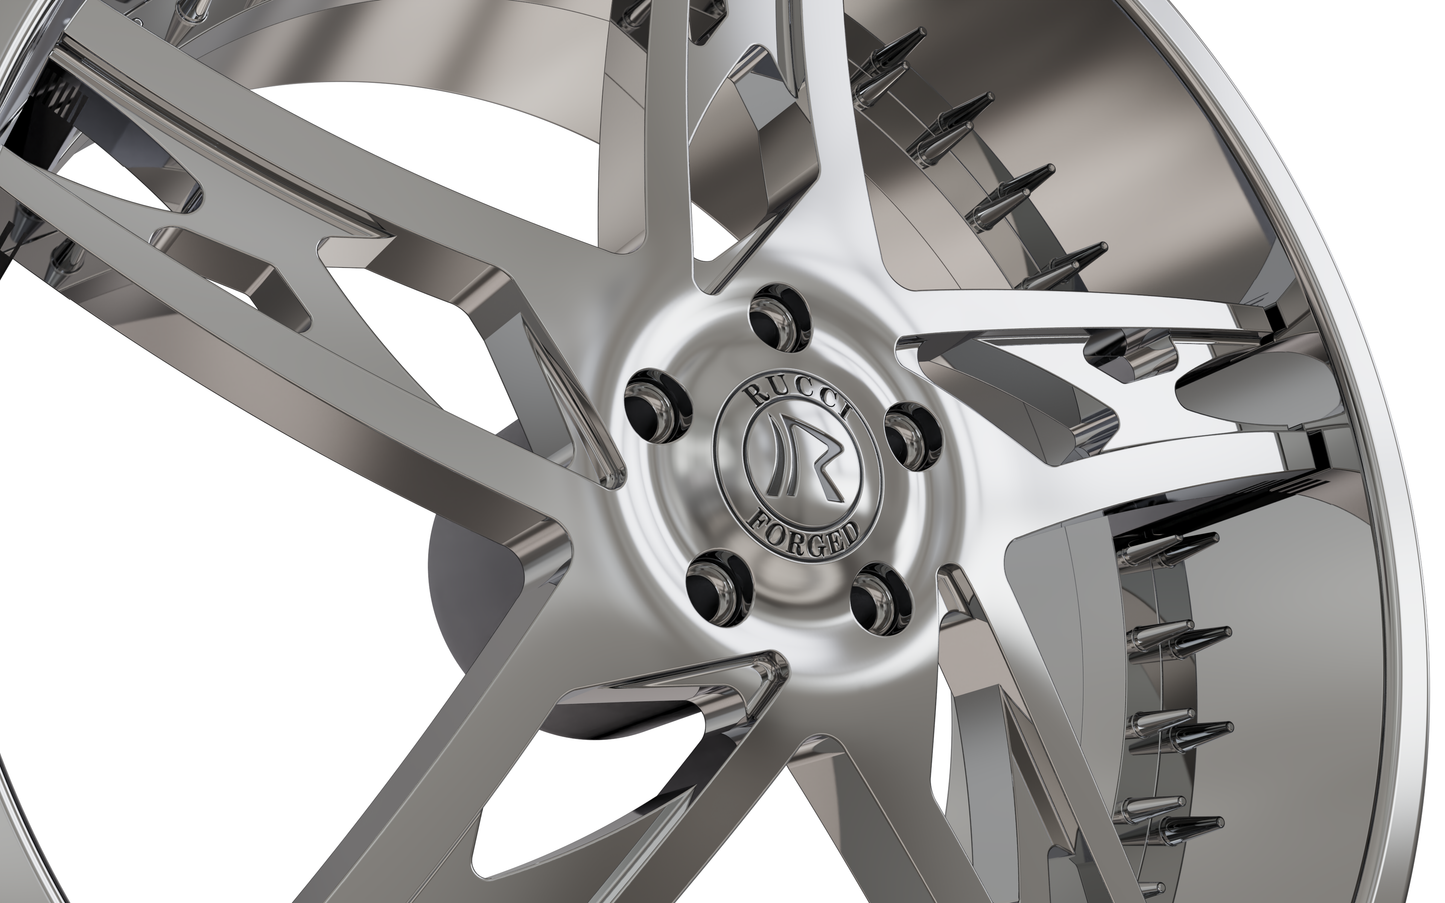 RUCCI FORGED CUERVO CONCAVE WHEEL 3D MODEL